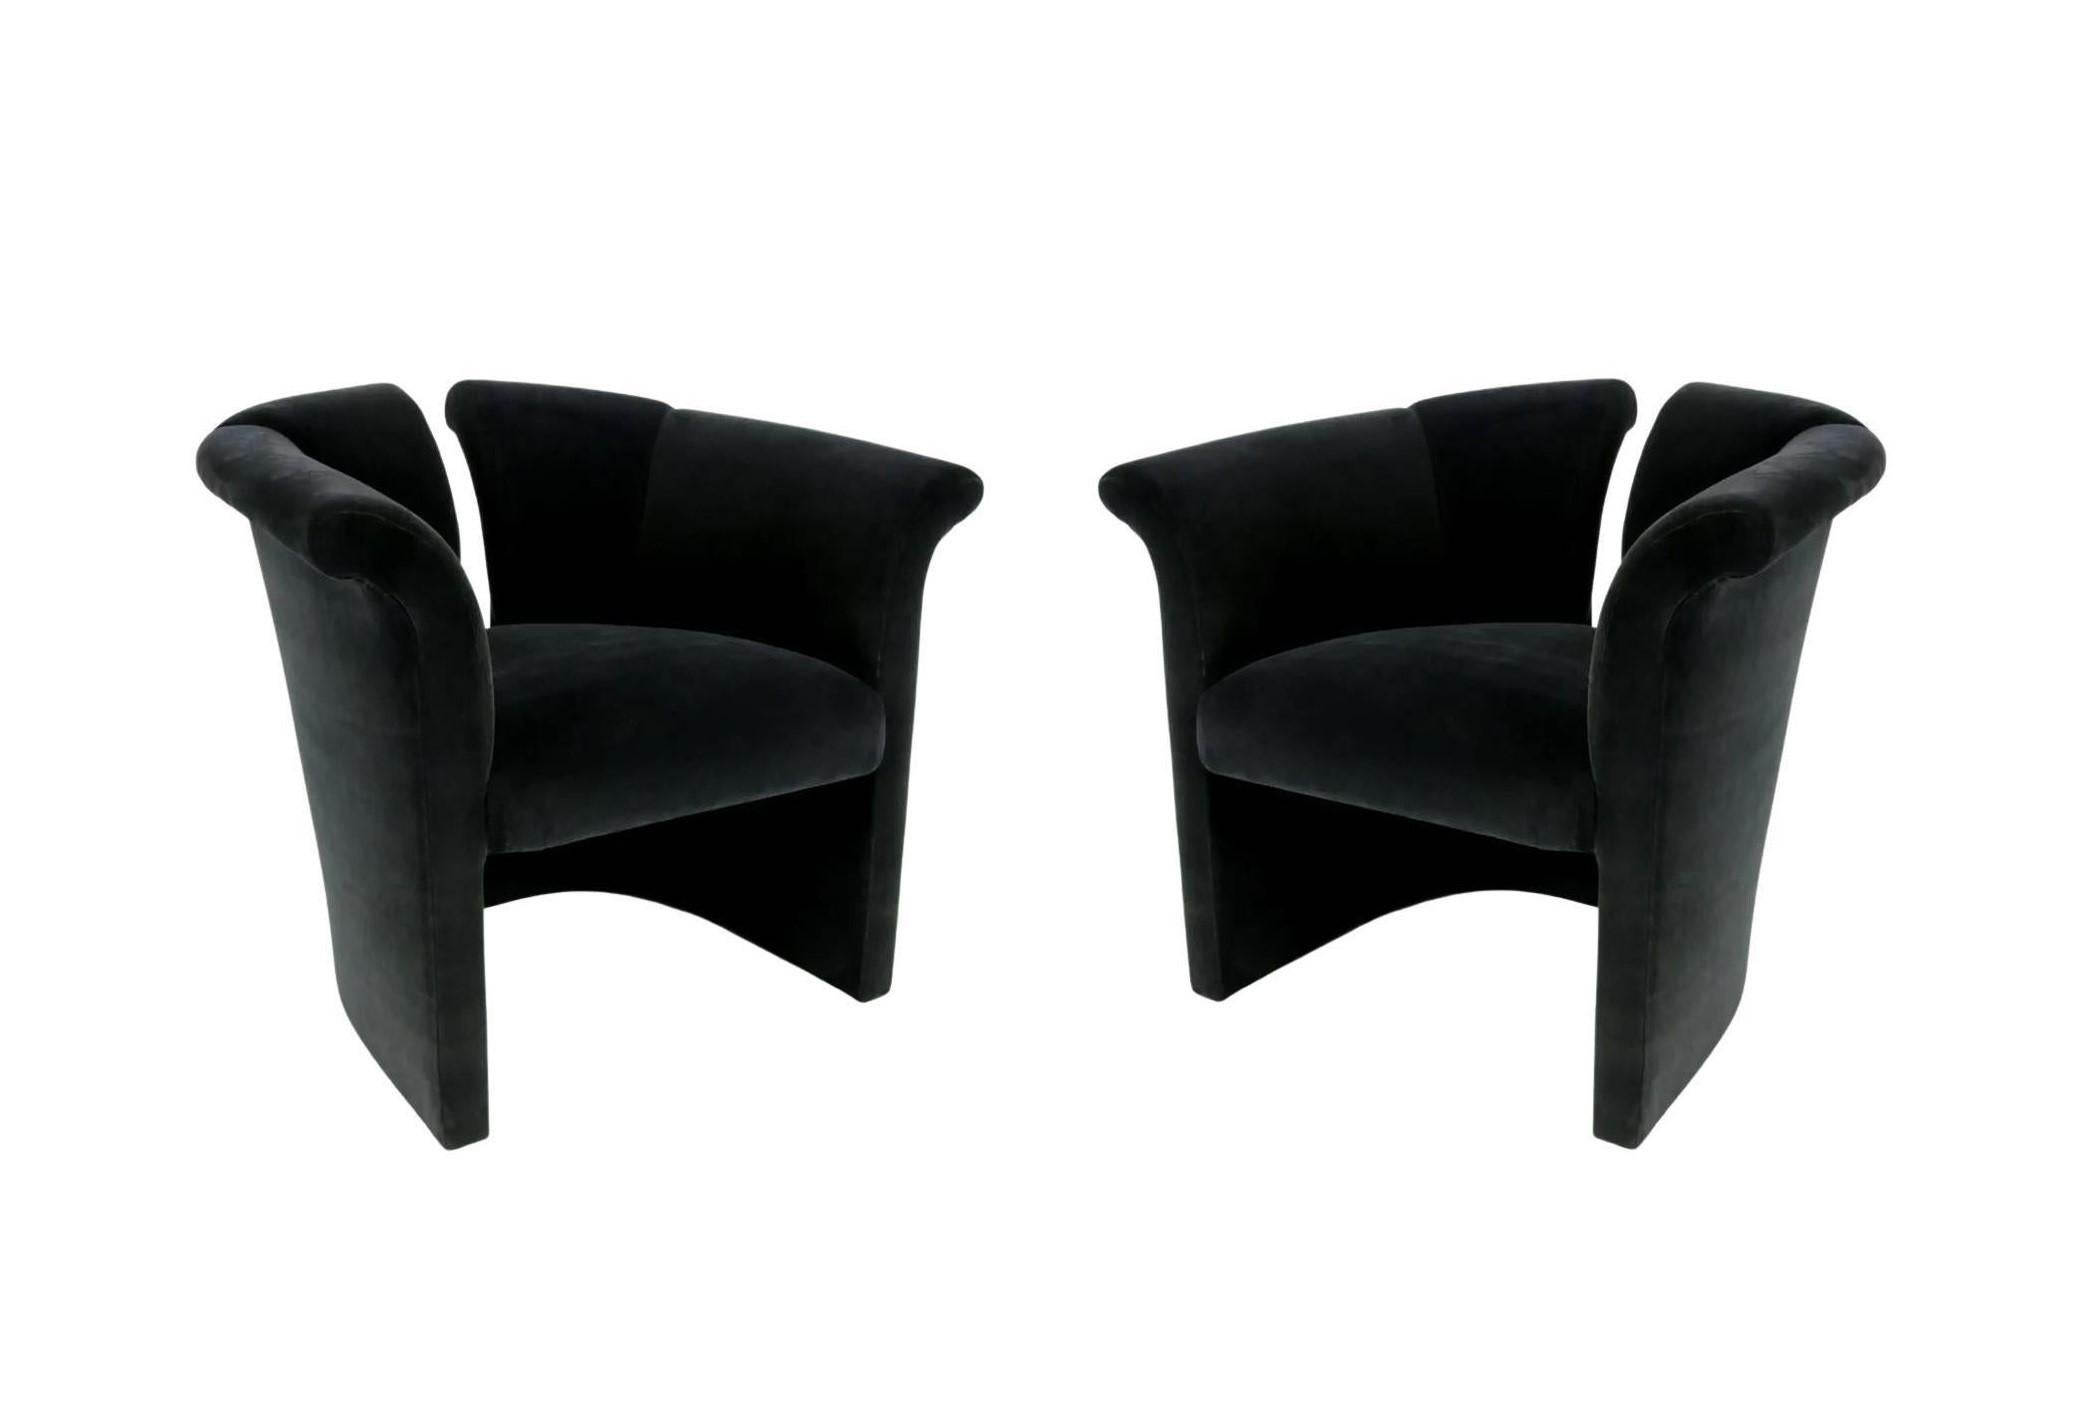 This is a unique pair of postmodern accent chairs designed by Milo Baughman. He was a pioneer in modern design and one of the leading modern furniture designers of the second half of the 20th century. Baughman's uniquely American designs are